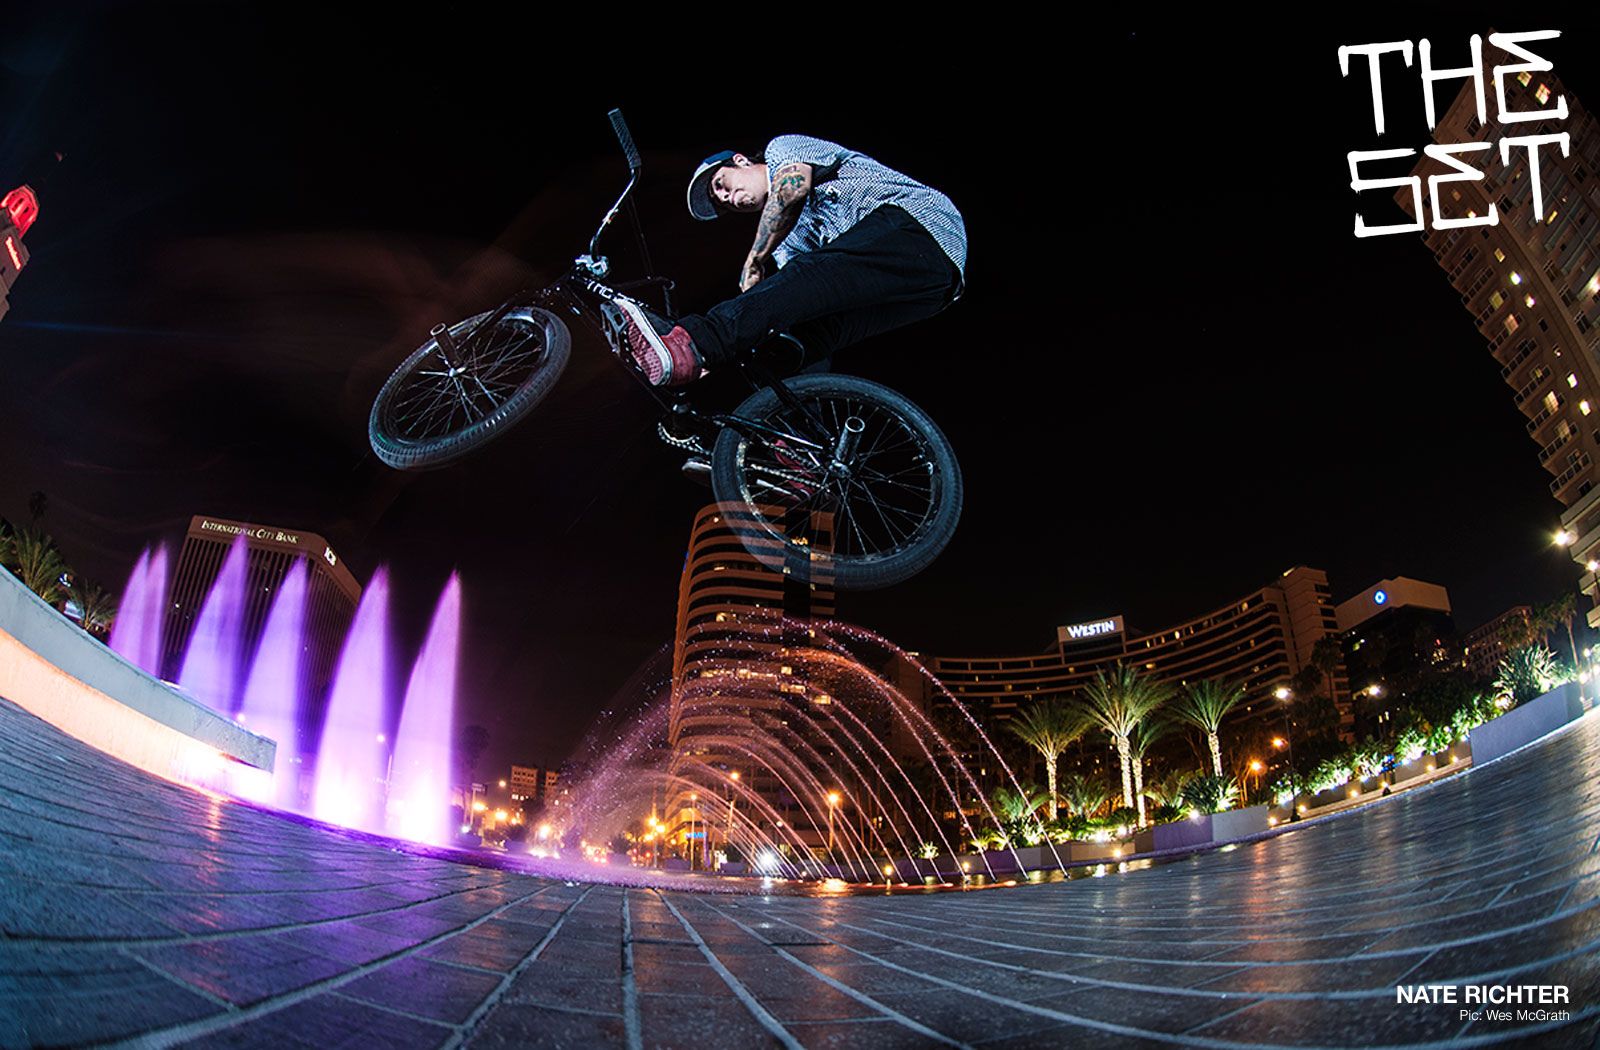 Wallpaper Archives - The Come Up BMX